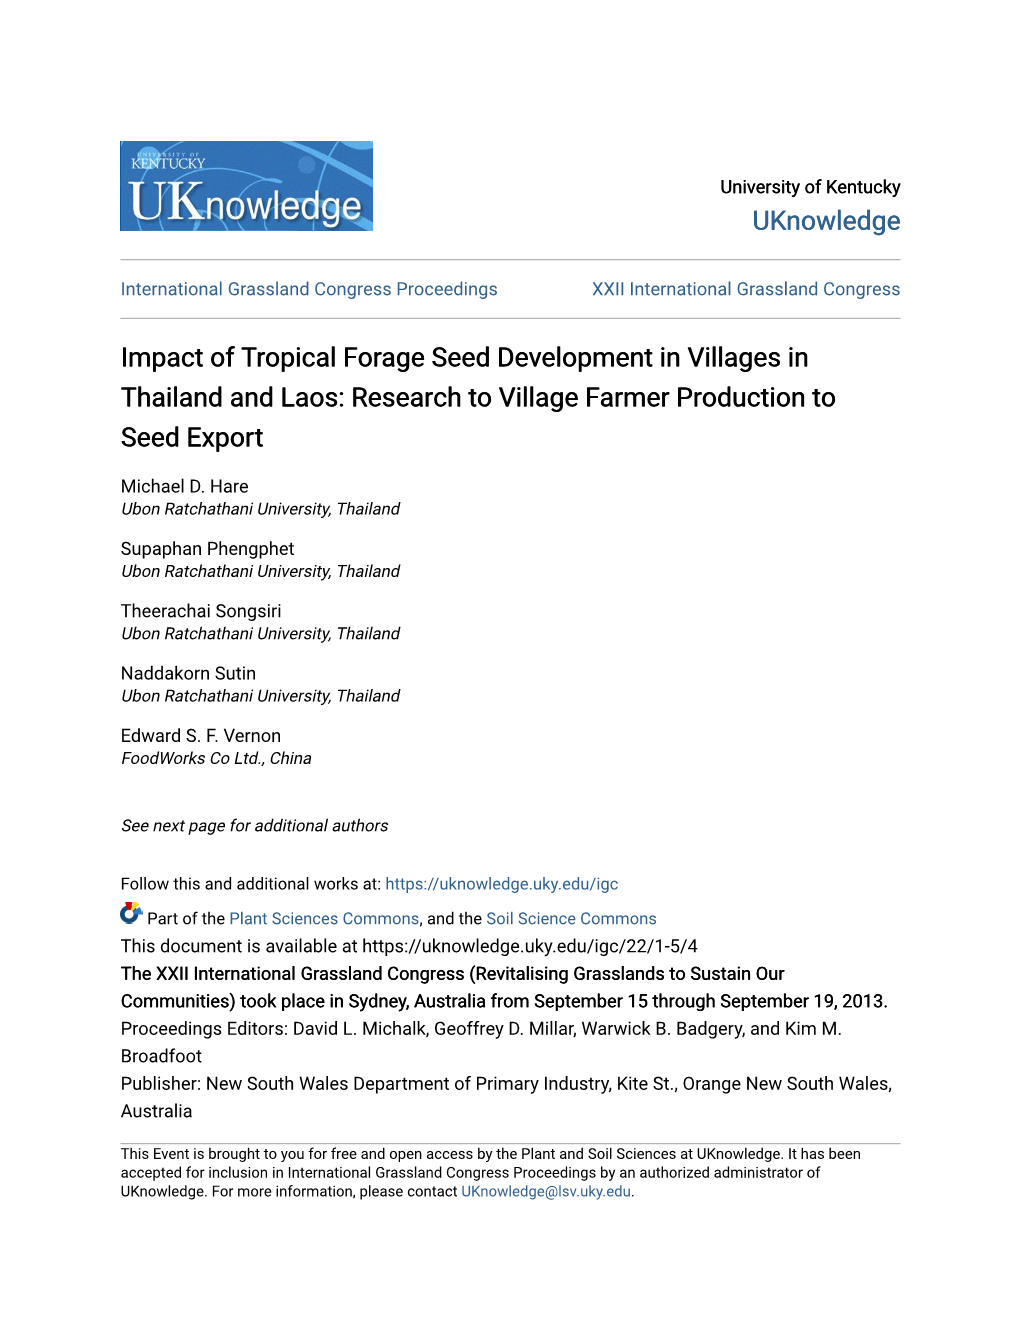 Impact of Tropical Forage Seed Development in Villages in Thailand and Laos: Research to Village Farmer Production to Seed Export